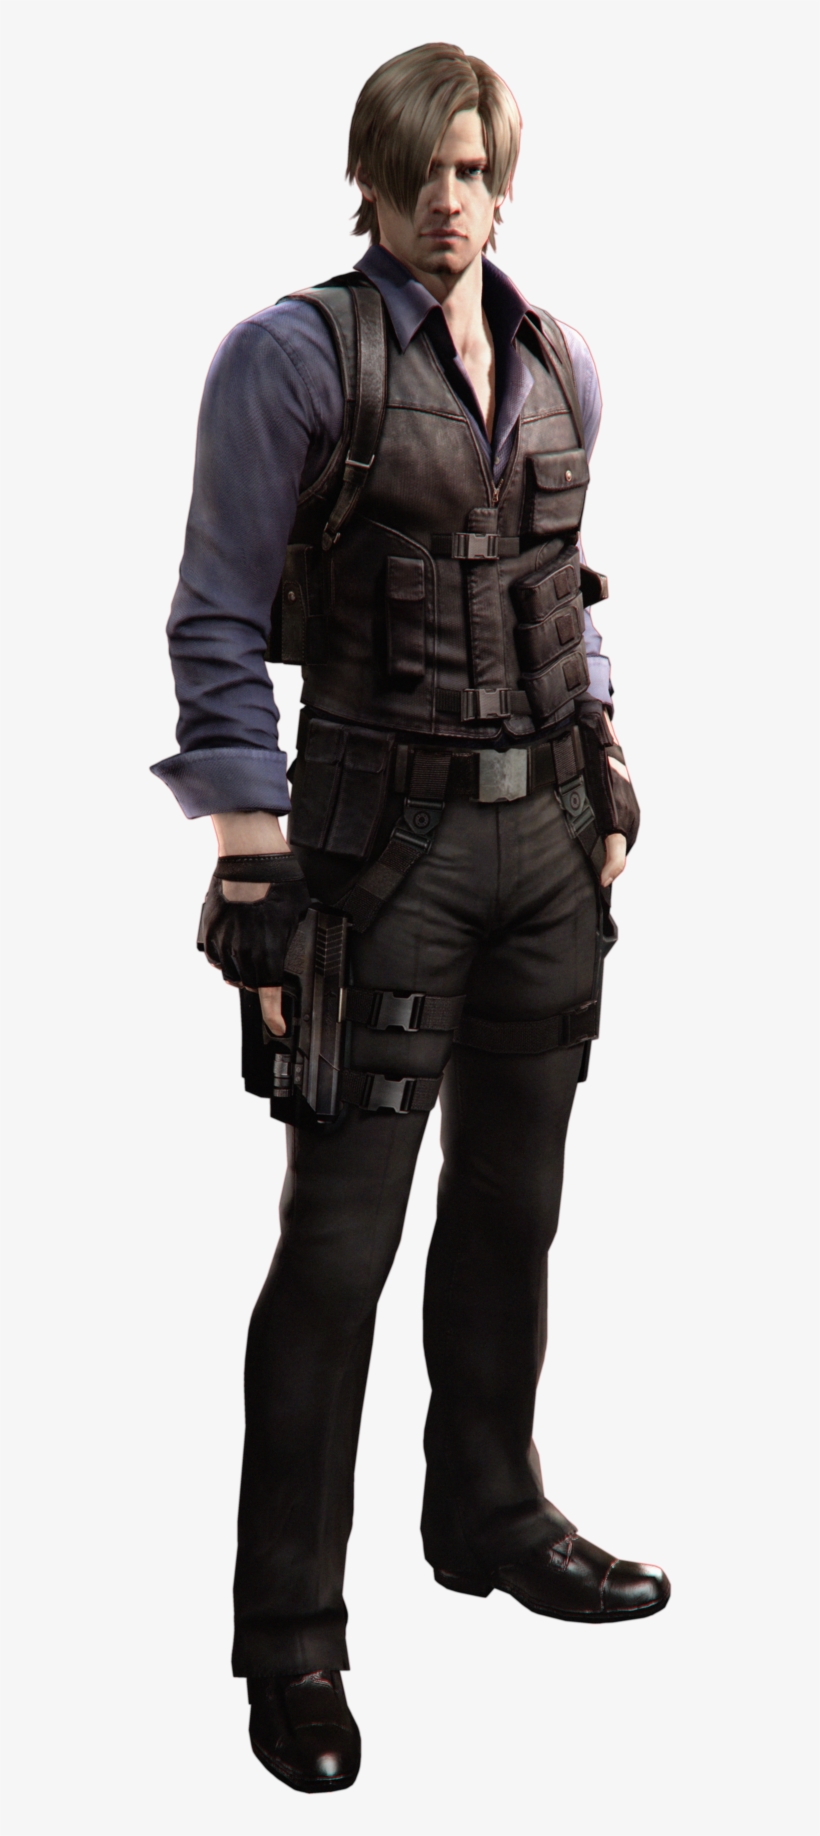 Kennedy Png Pic - Leon S Kennedy Resident Evil 6, transparent png #1255565